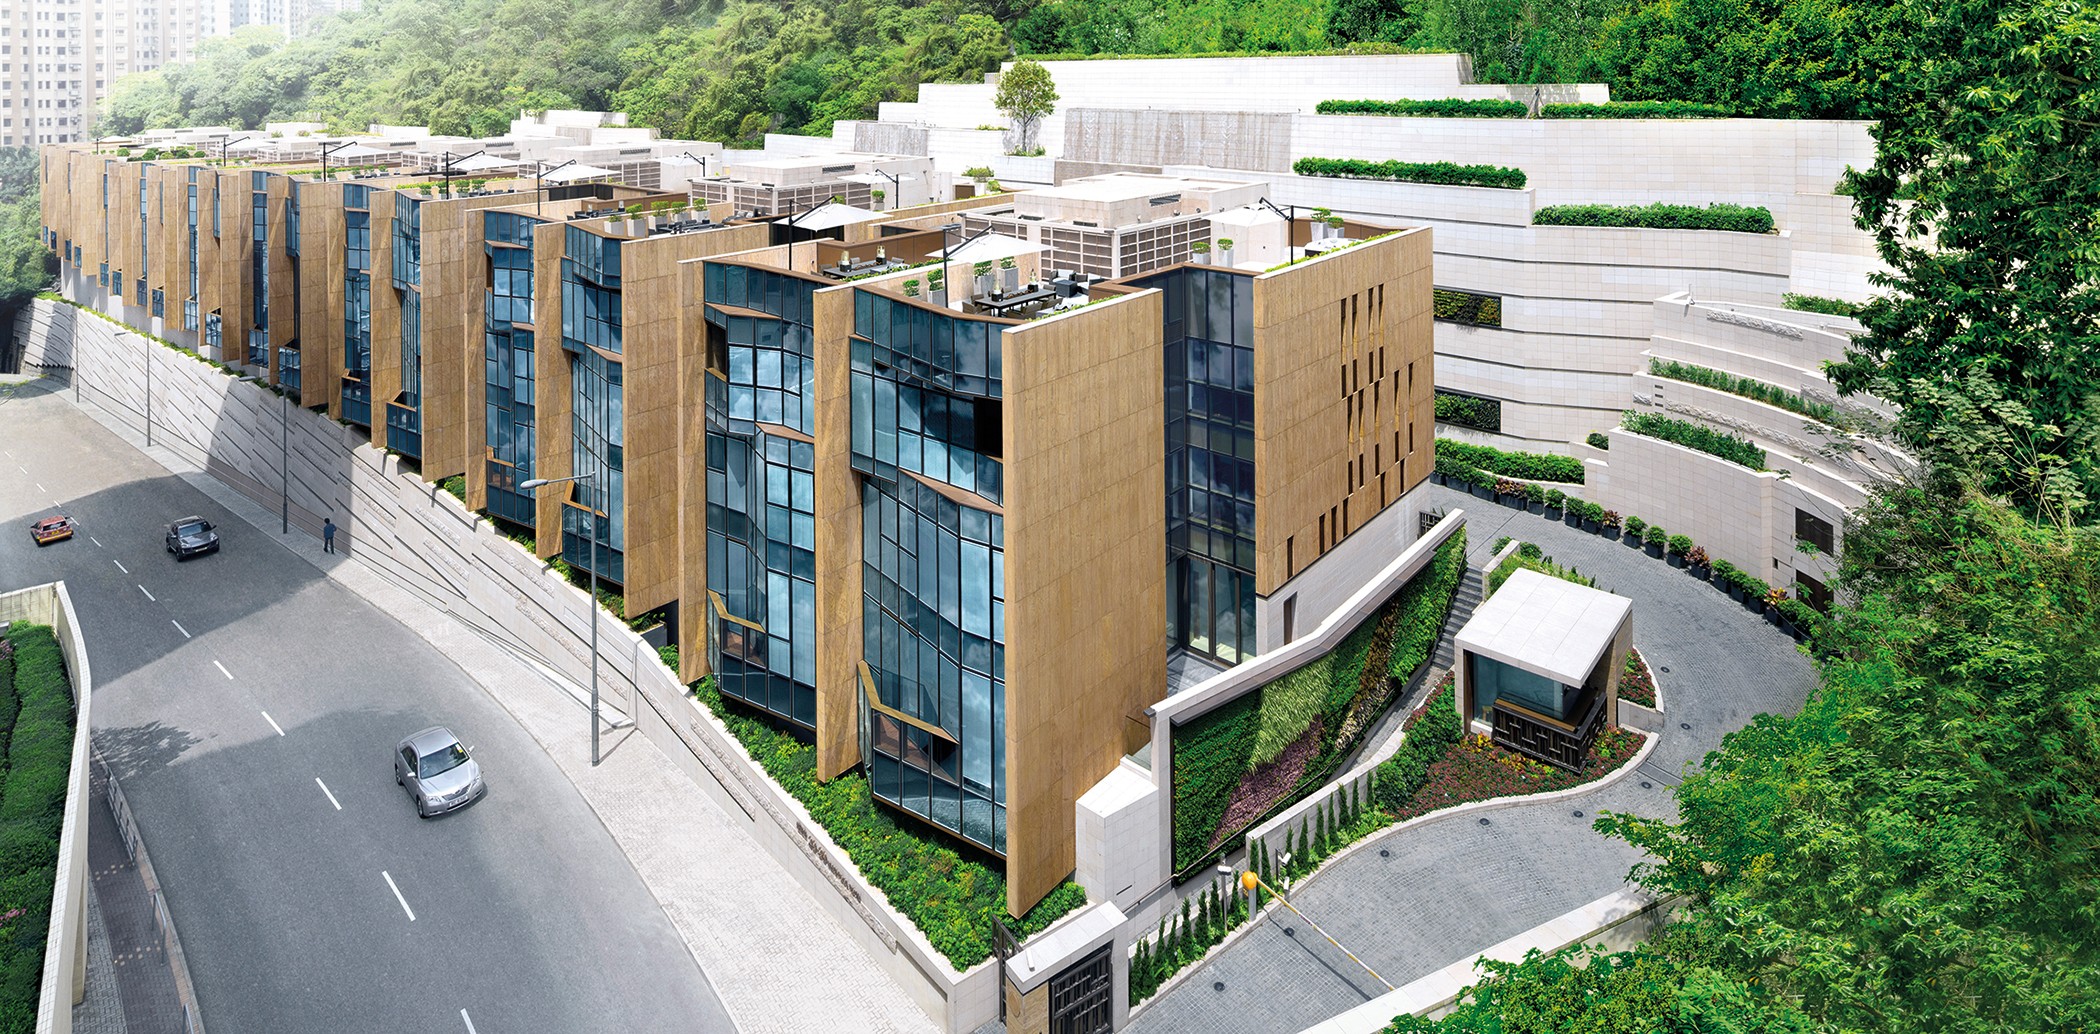 23-39 Blue Pool Road, by Hang Lung Properties, offers 18 semi-detached houses.